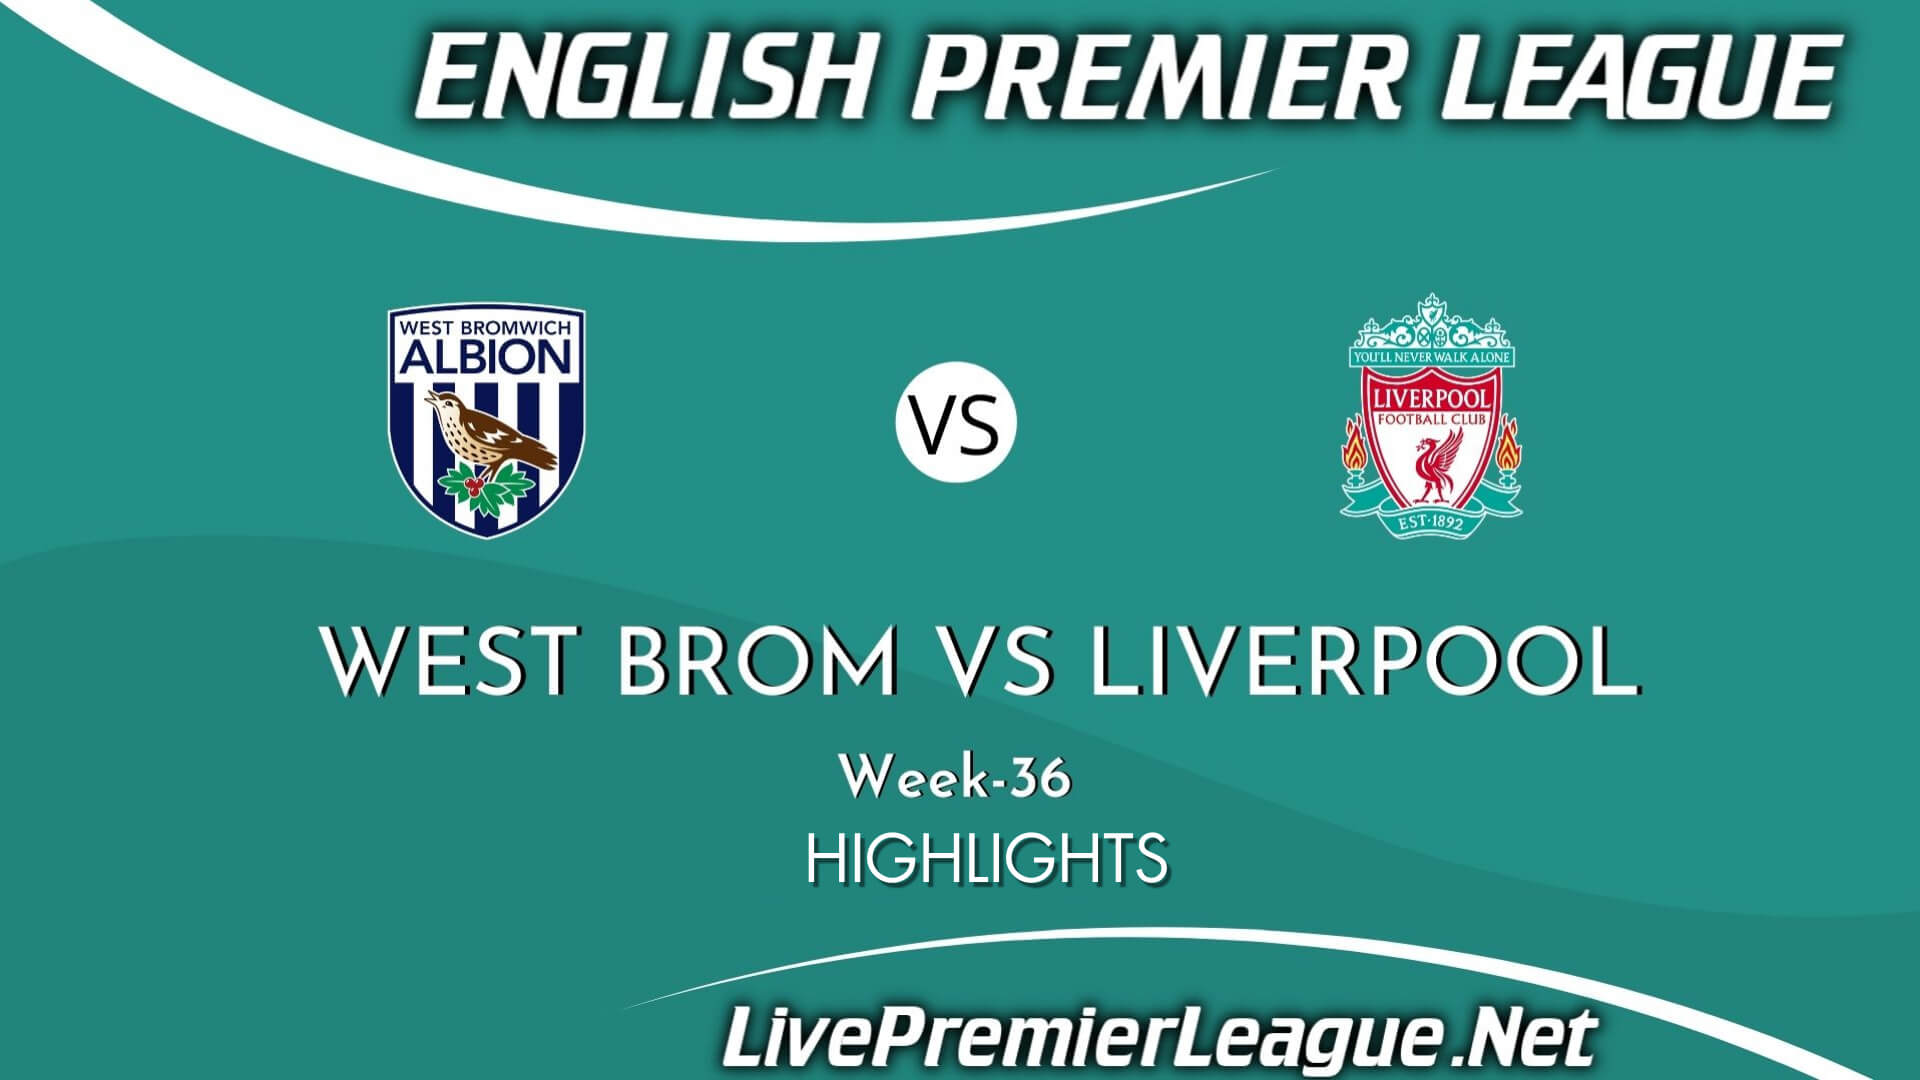 West Bromwich Vs Liverpool Highlights 2021 Week 36